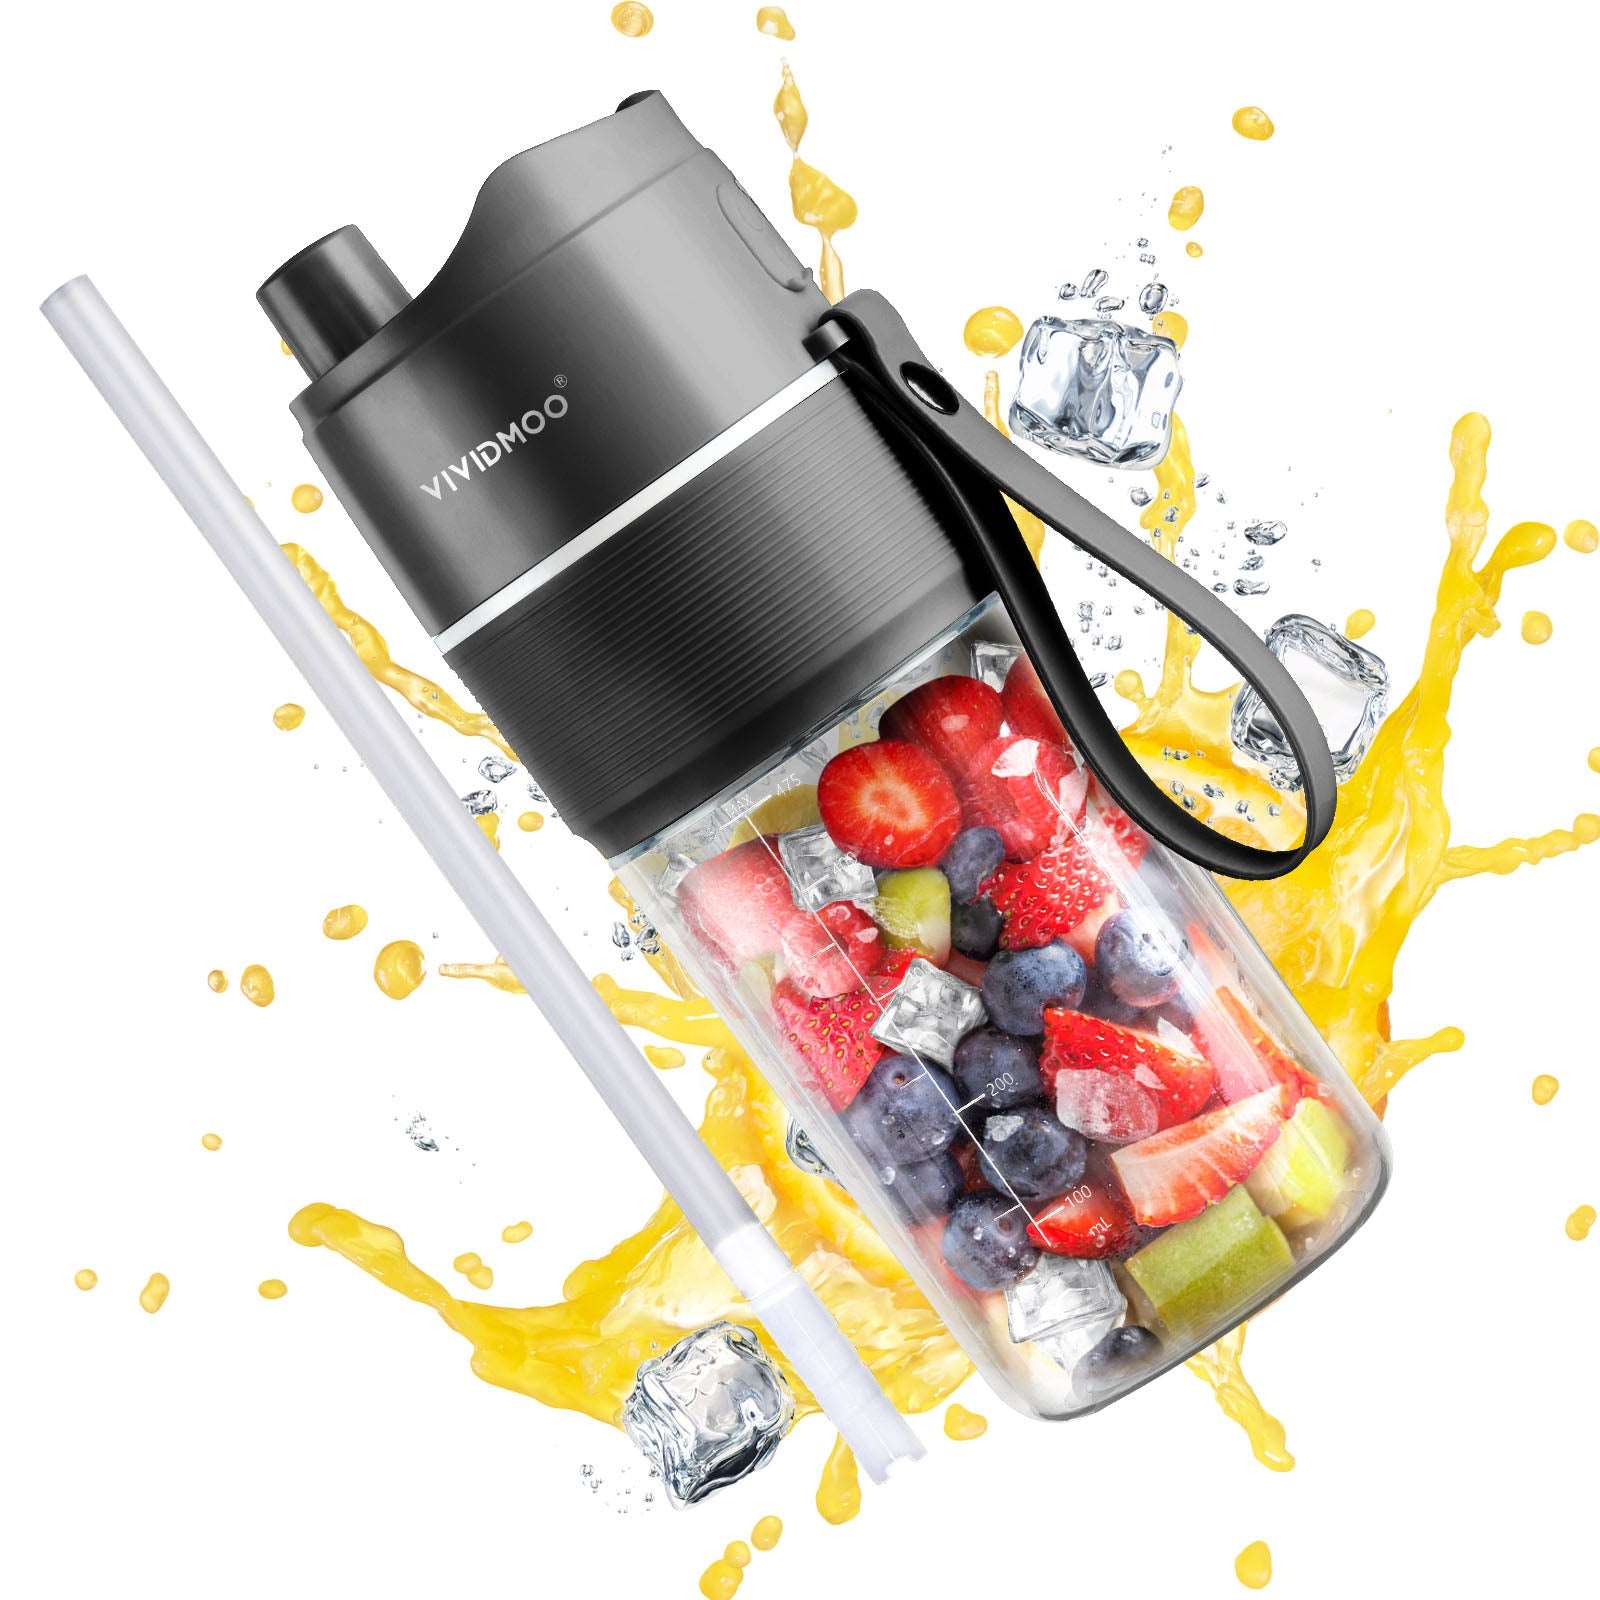 Portable Blender, Personal Size Blender for Juice, Shakes and Smoothies, Wireless Charging with Four Blades, Mini Travel Bottle for Blender, Size: 82*